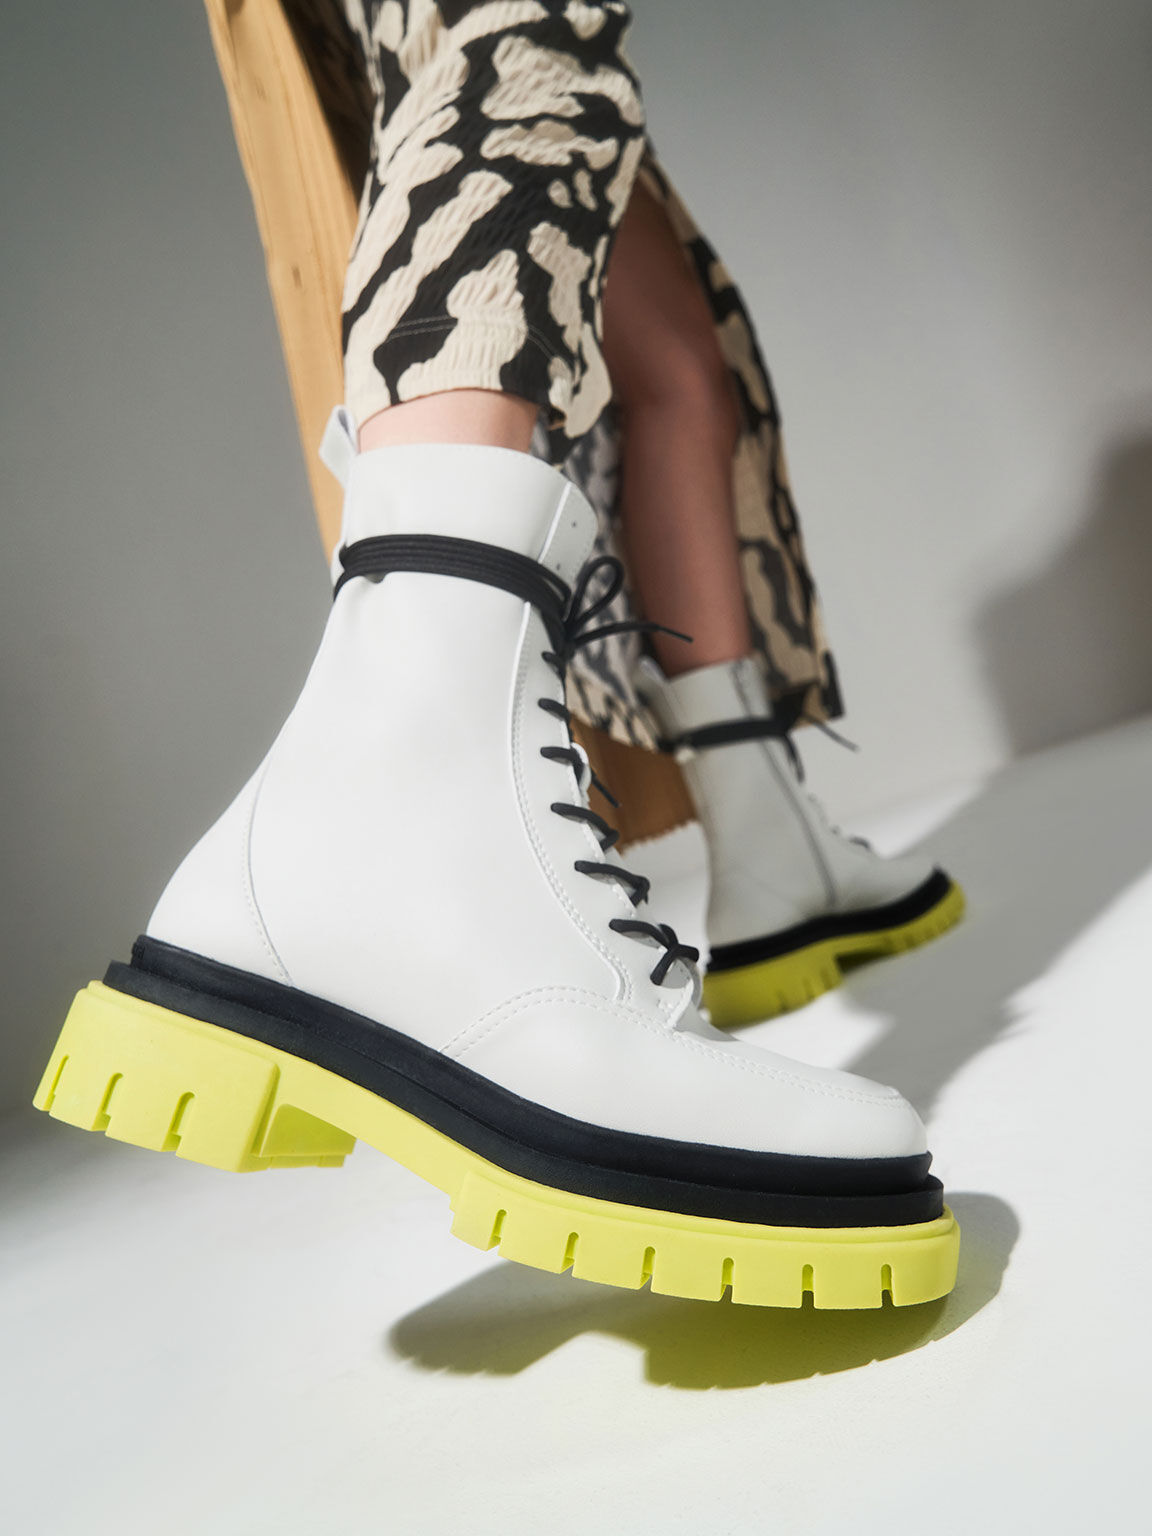 Charles & Keith Iggy Coloured Sole Combat Boots​